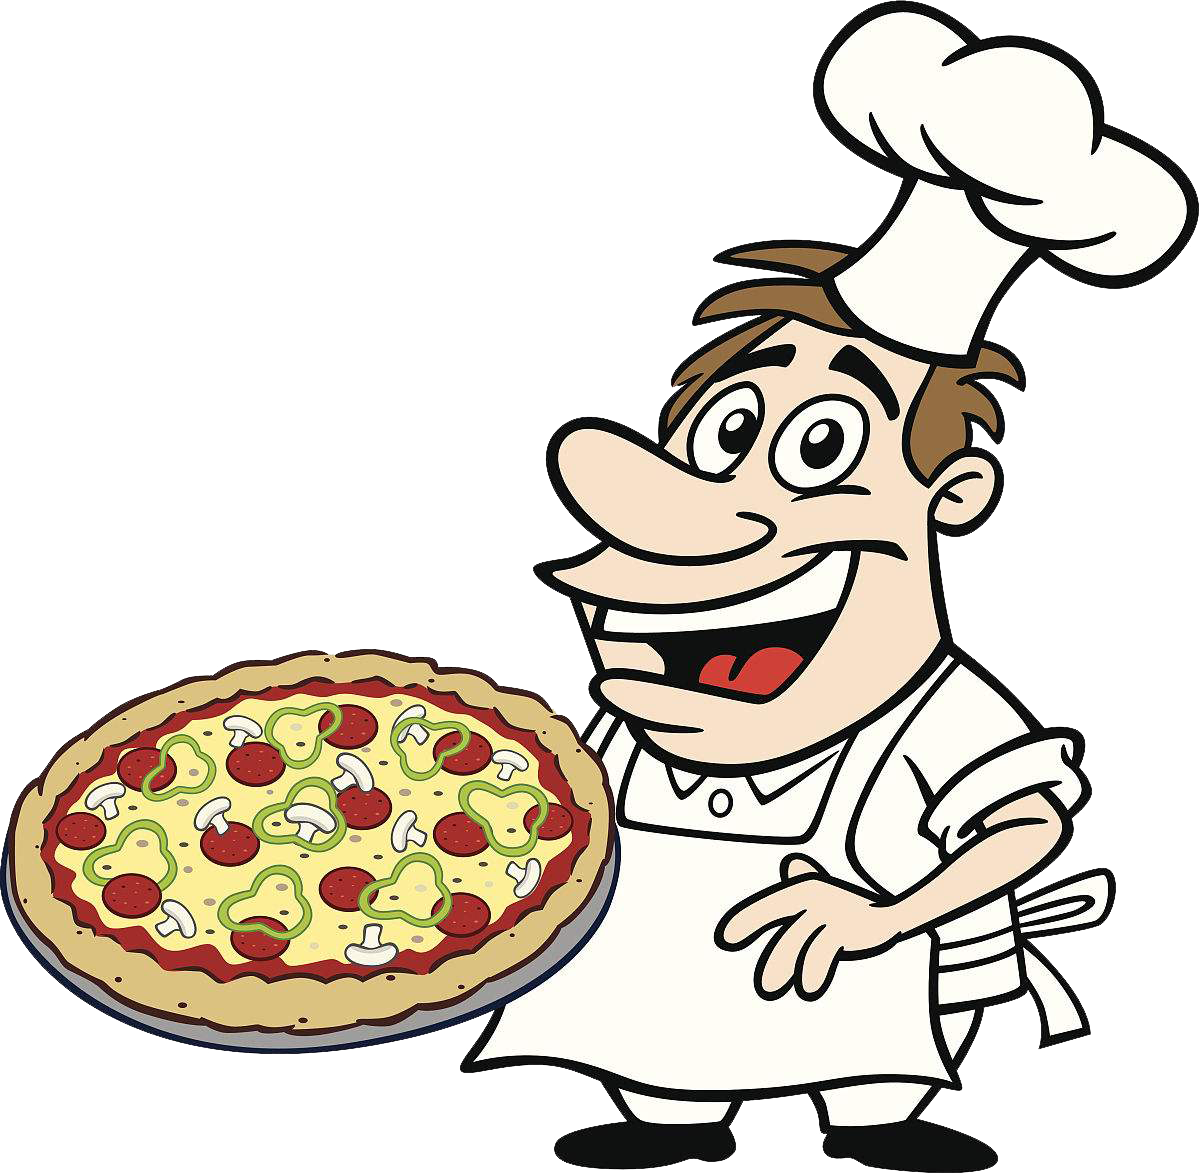 Cooking clipart covered food. Barbecue cartoon chef with